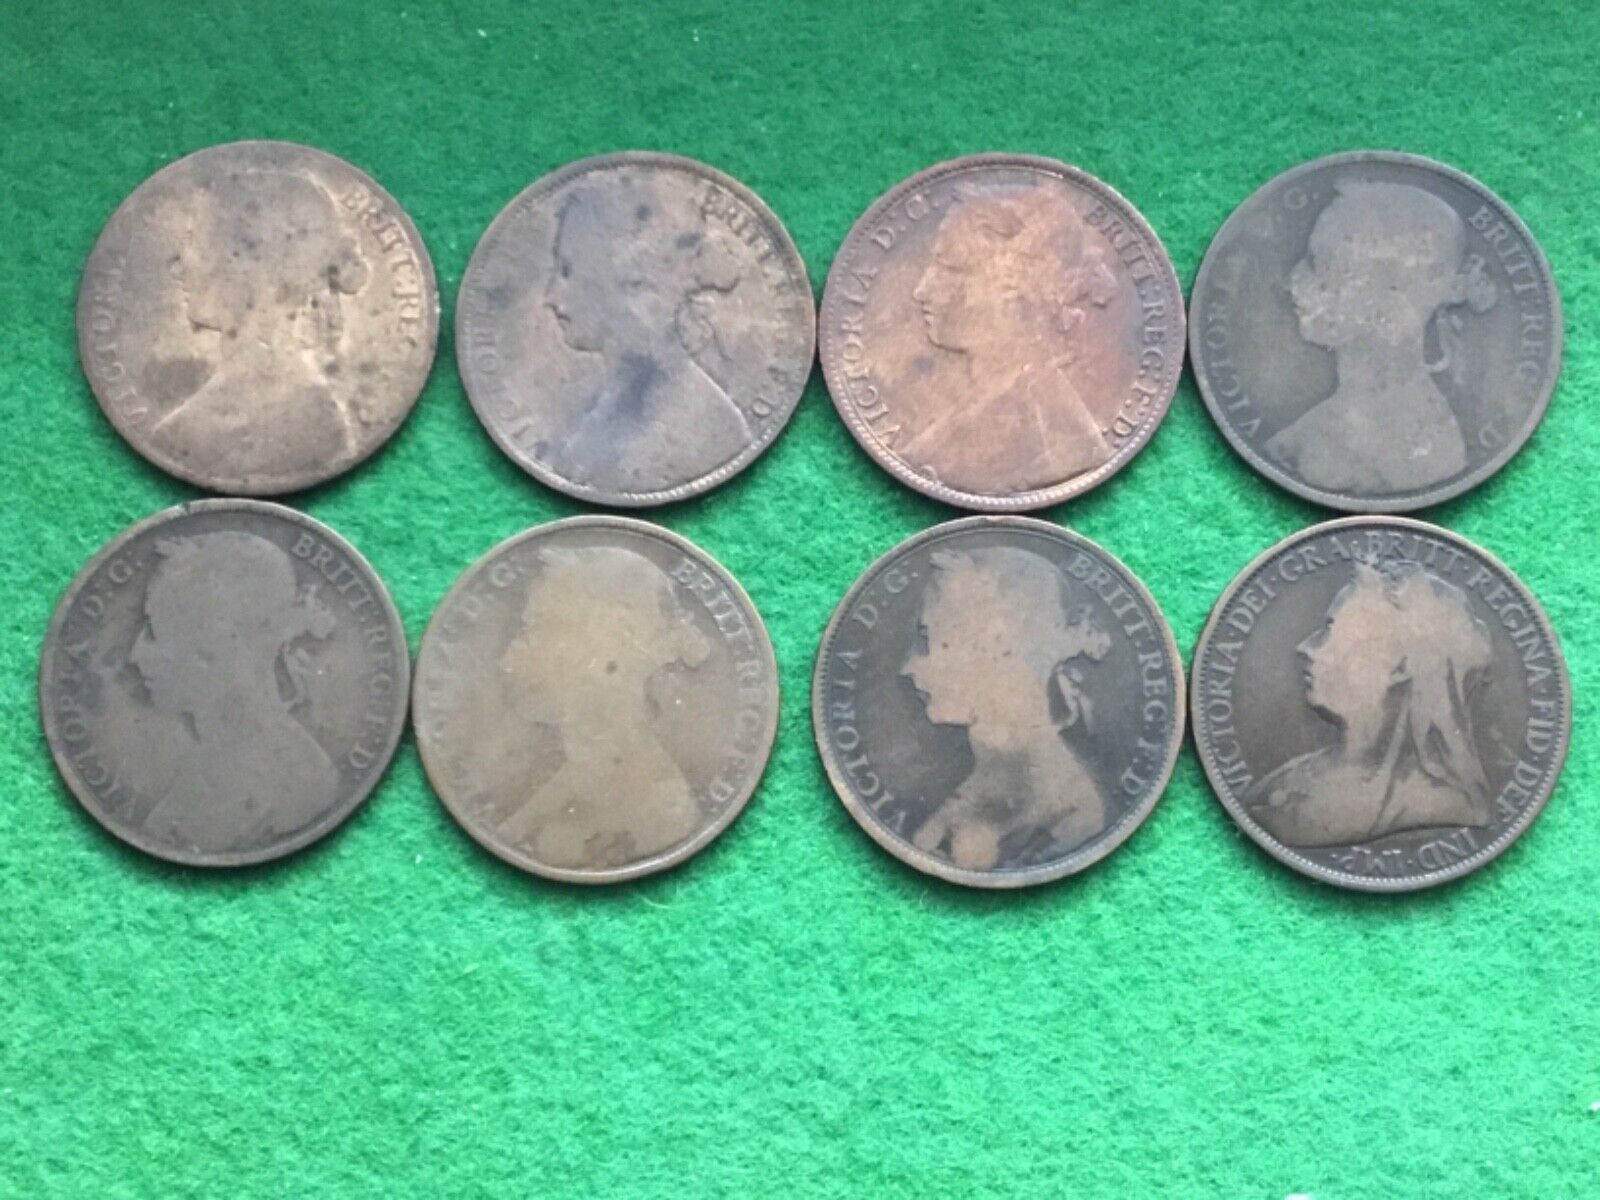 WORLD FOREIGN COINS - LOT OF 8 OLD UK GREAT BRITAIN BRONZE PENNIES (1860 - 1897) Без бренда